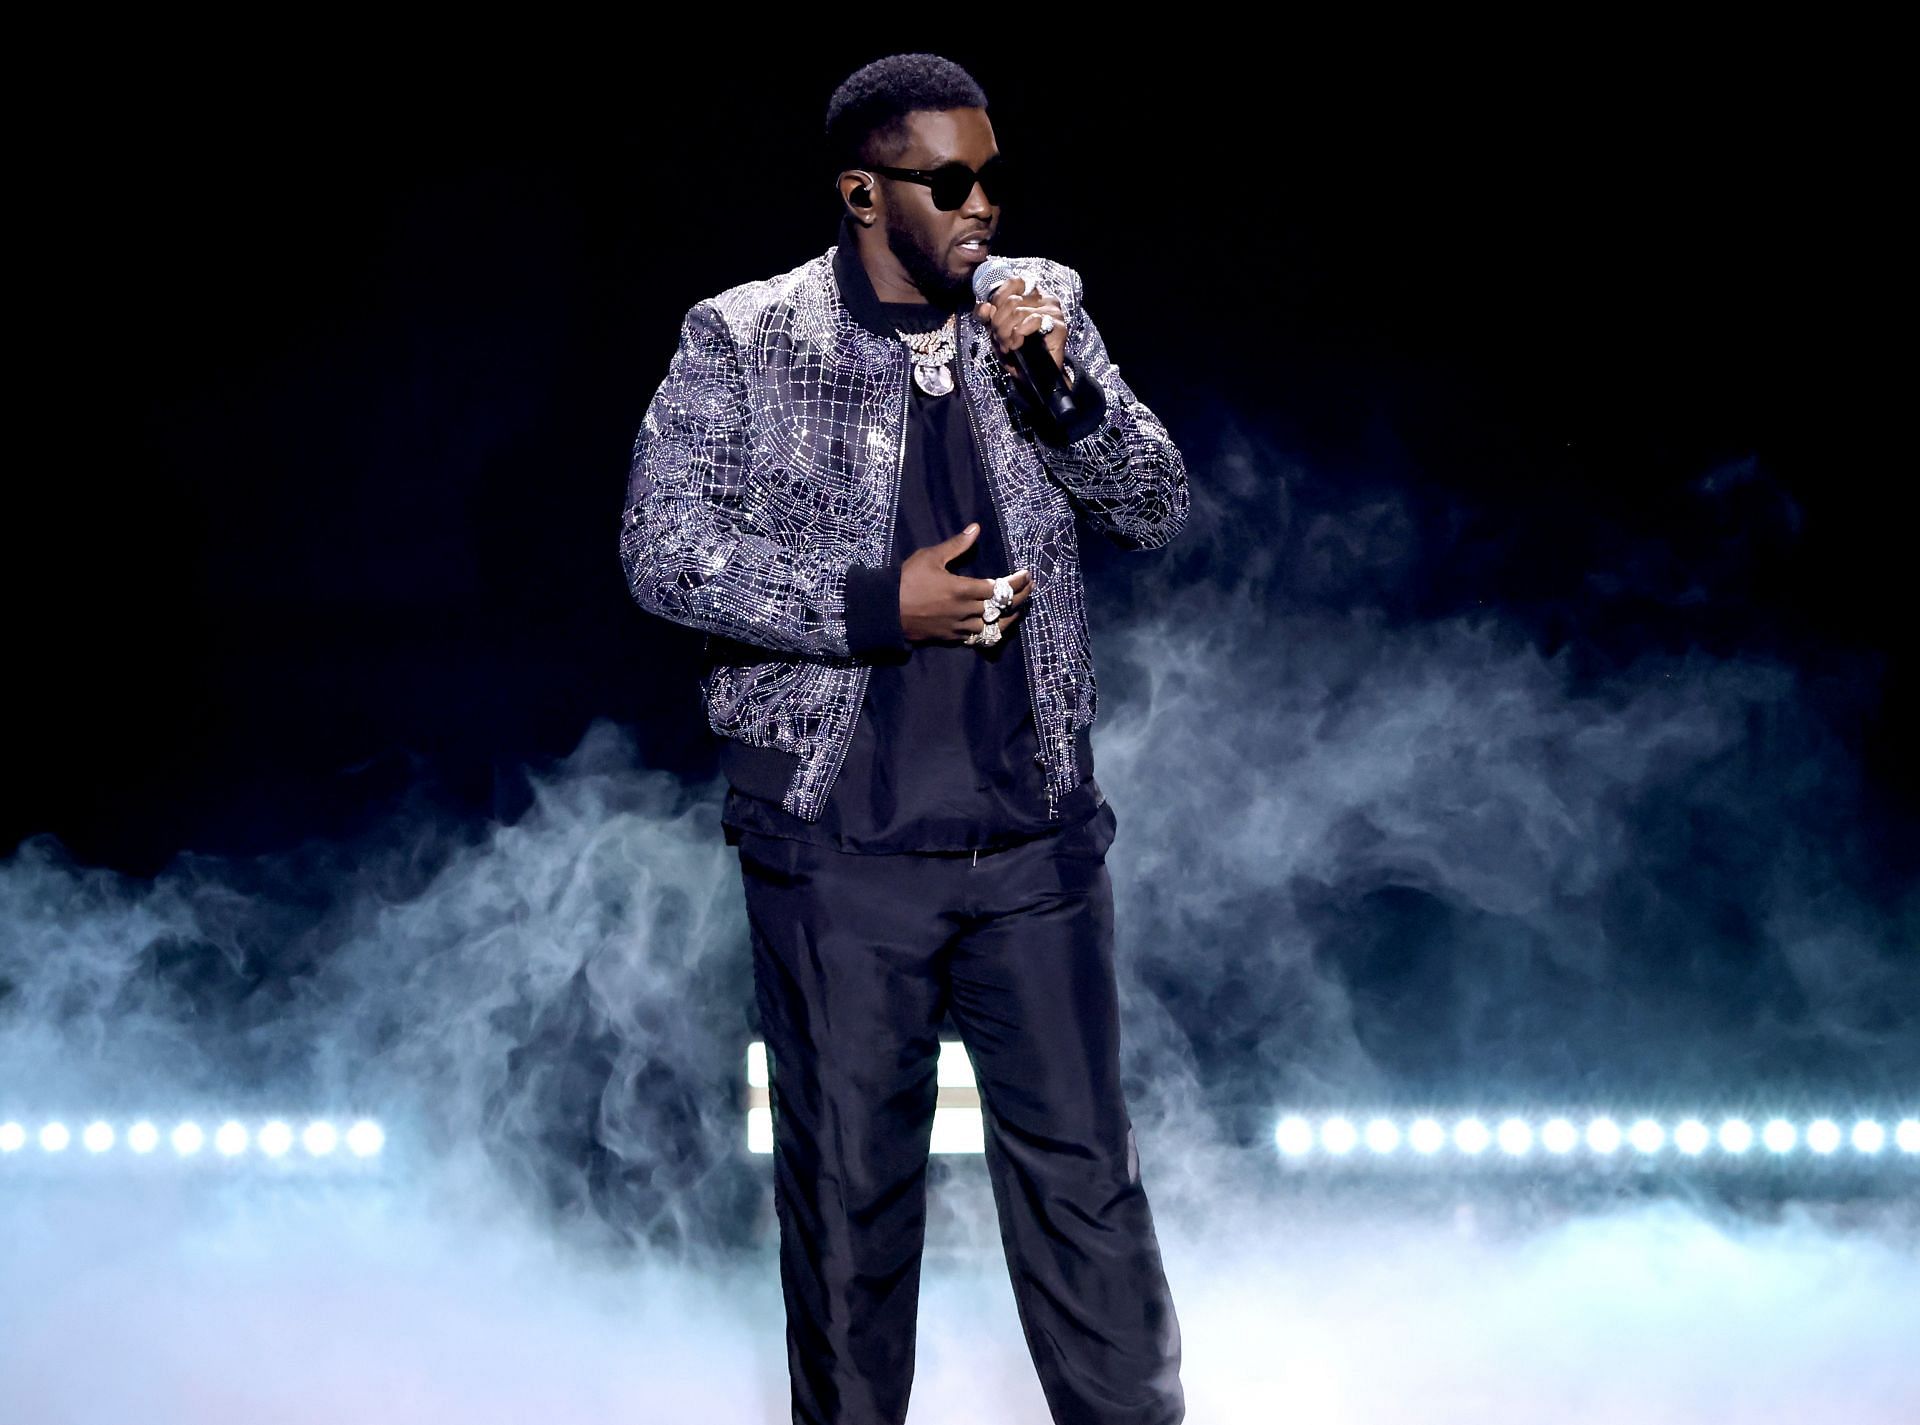 Sean Combs, the rapper and record producer (Image via Getty)